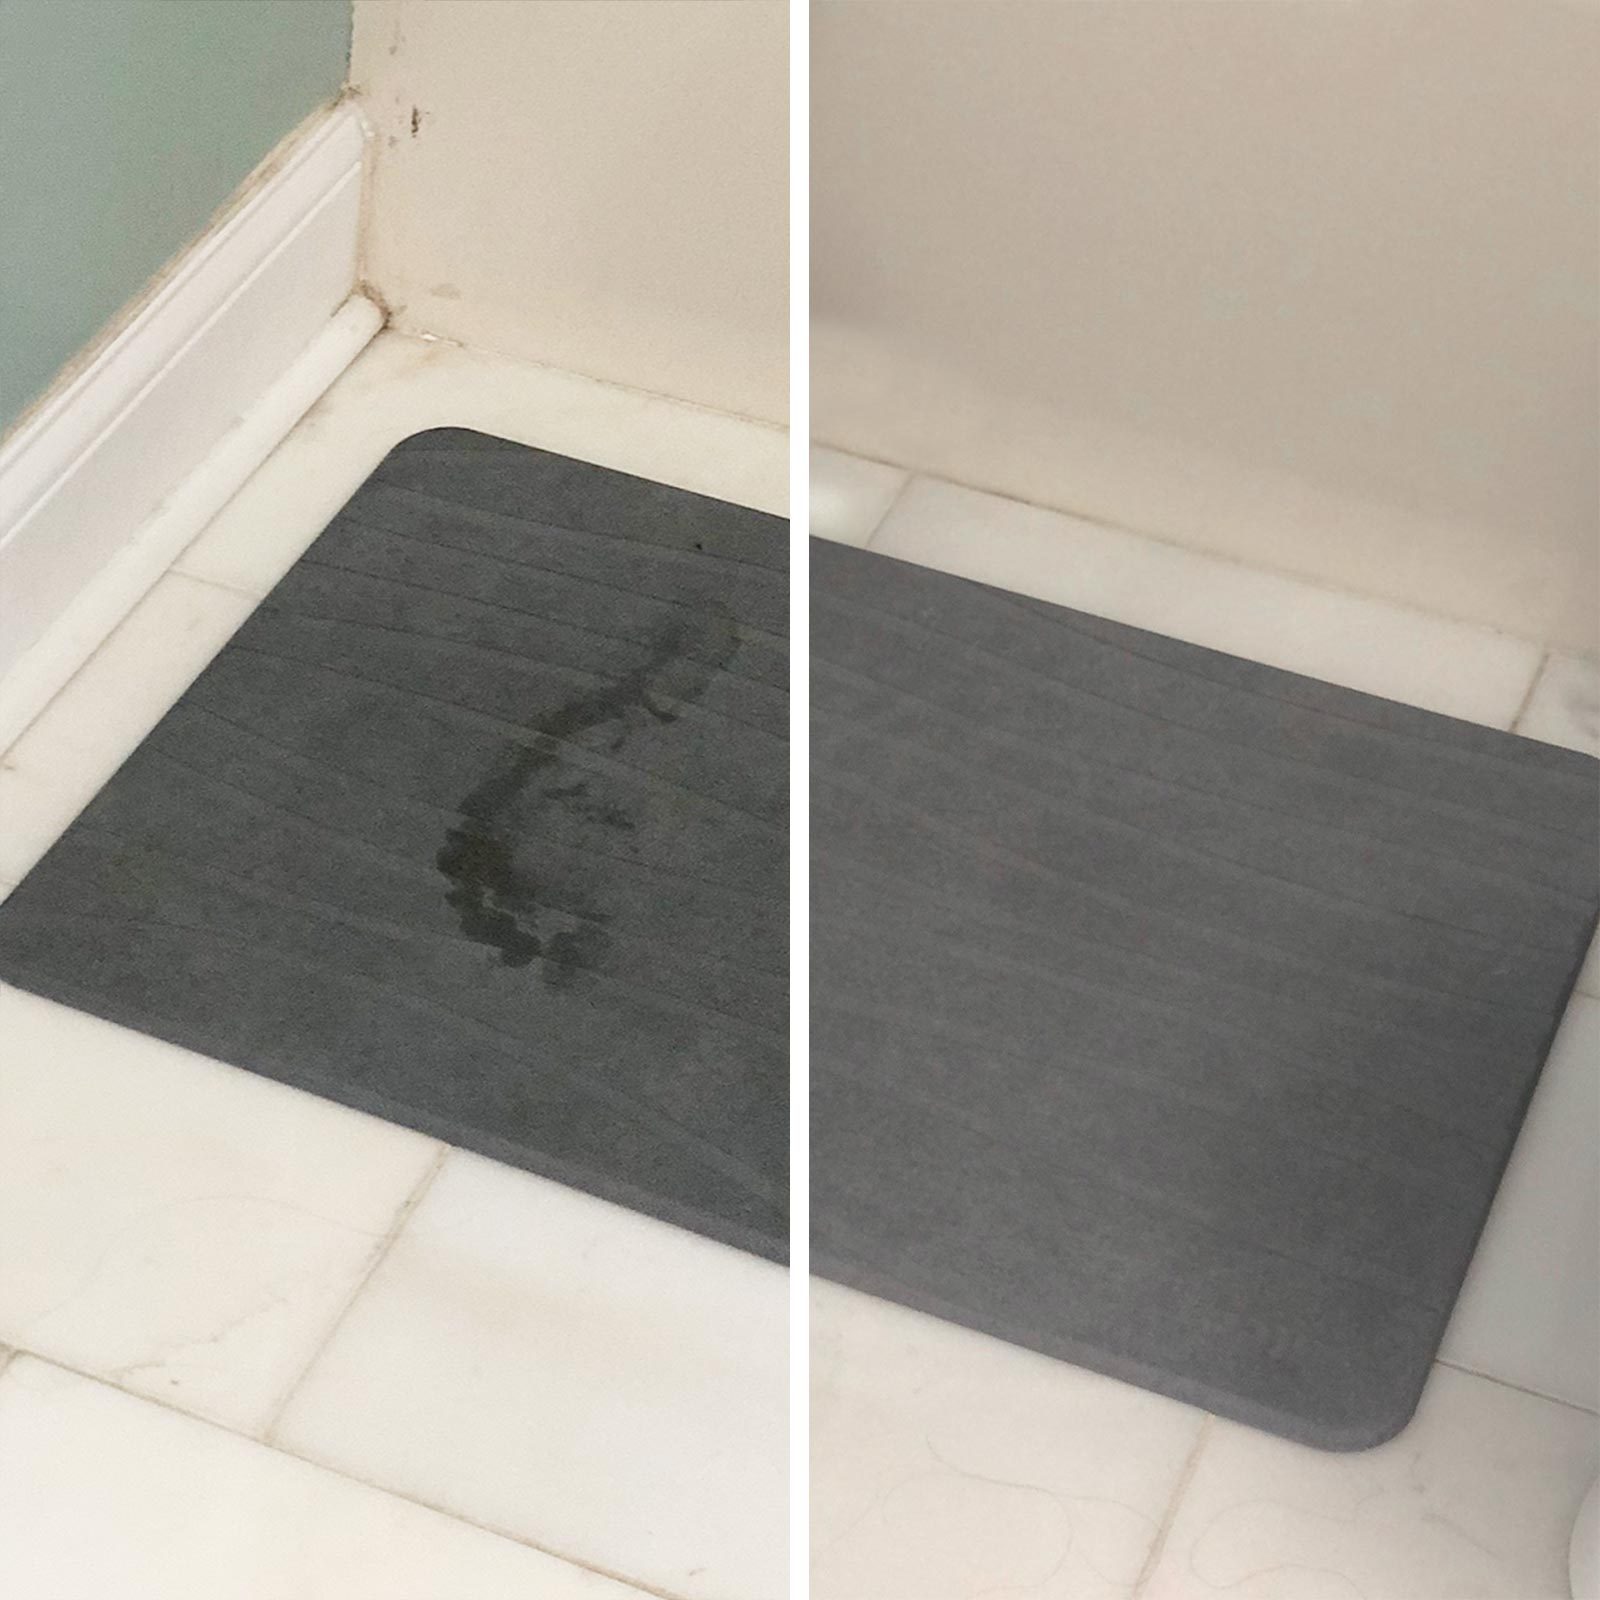  Before And After Sutera Stone Bath Mat